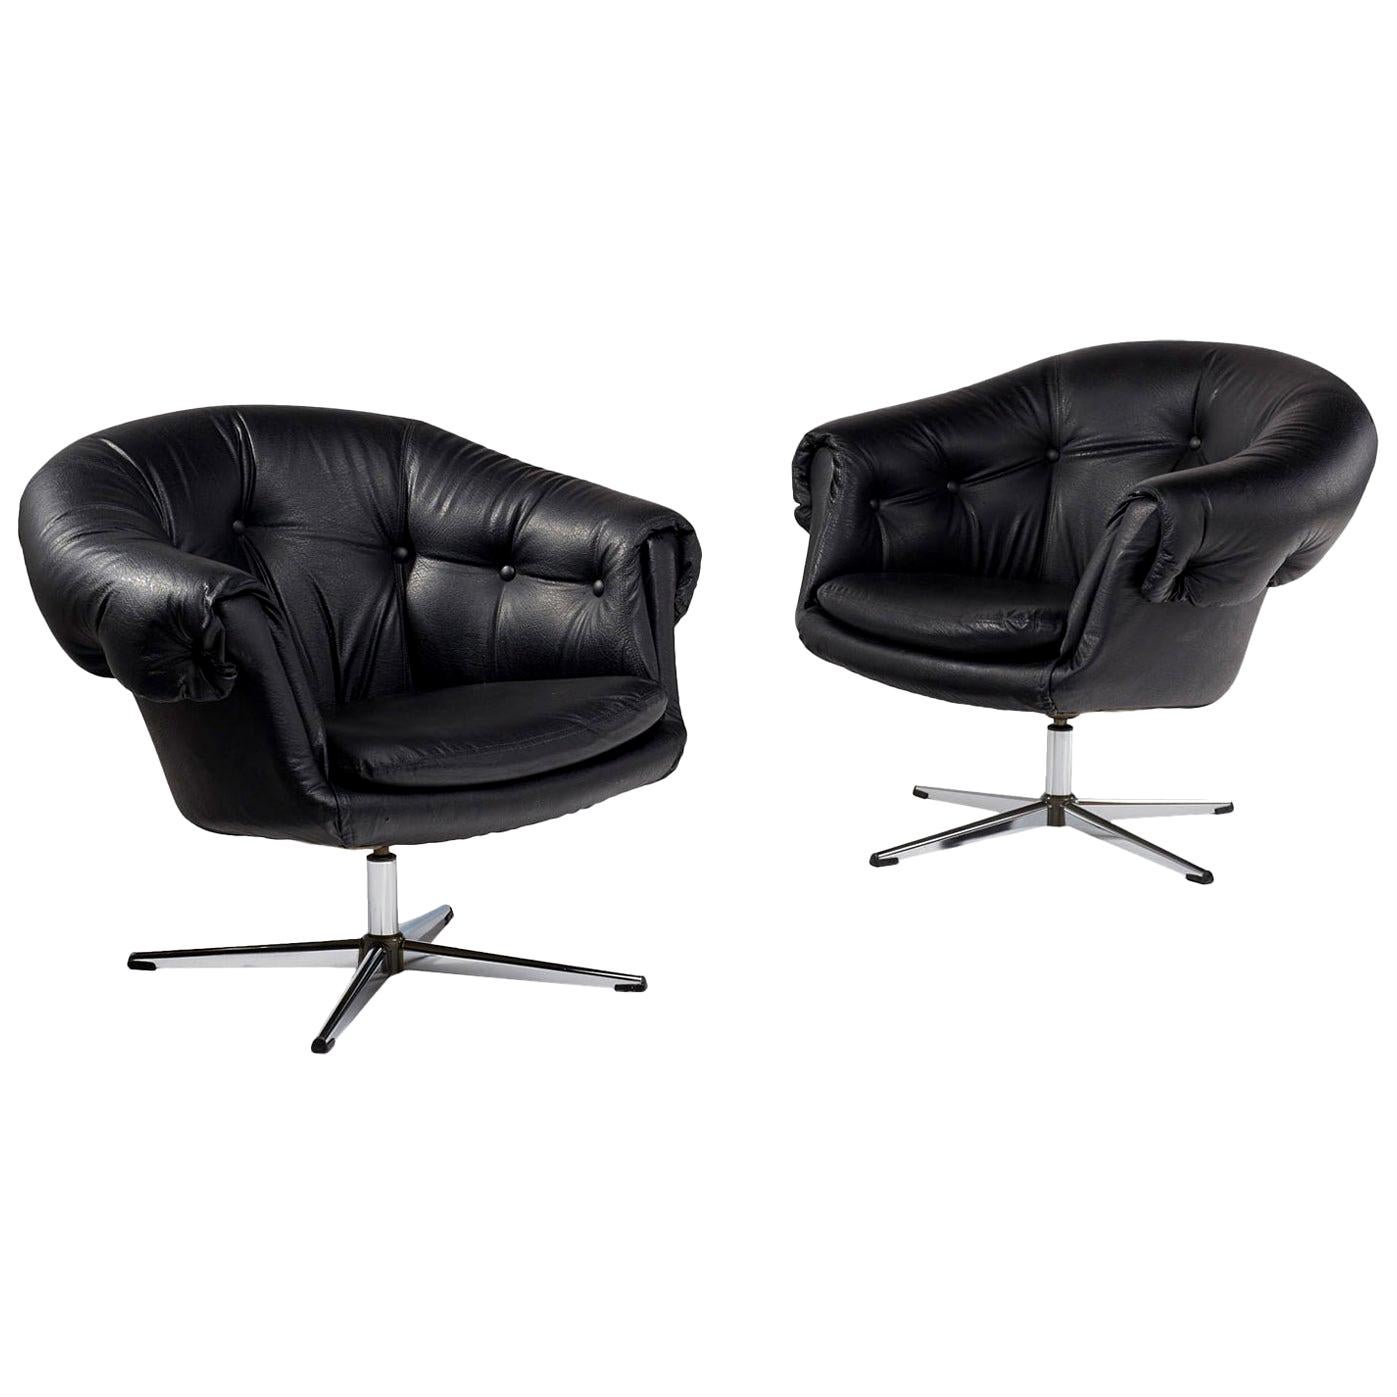 Overman Style Mod Pod Lounge Chair Set in Black Tufted Vinyl, Four Star Bases